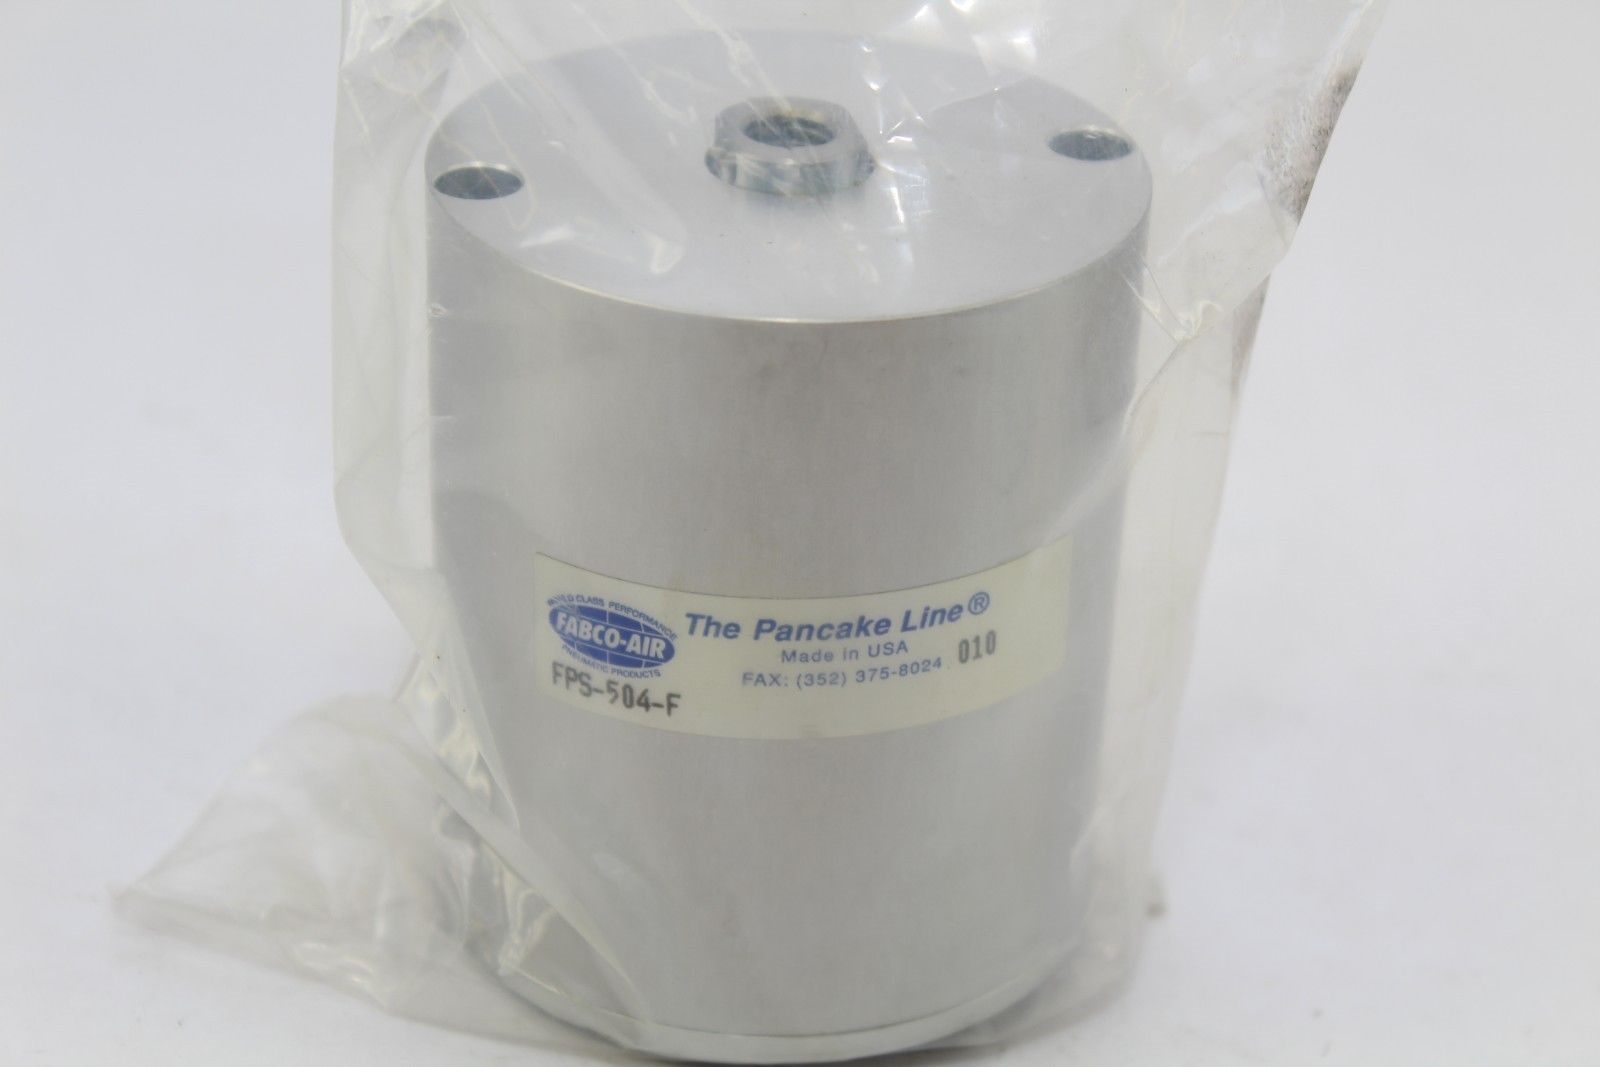 NEW! FABCO-AIR PANCAKE LINE FPS-504-F 010 STAINLESS CYLINDER FAST SHIP! (F222) 1